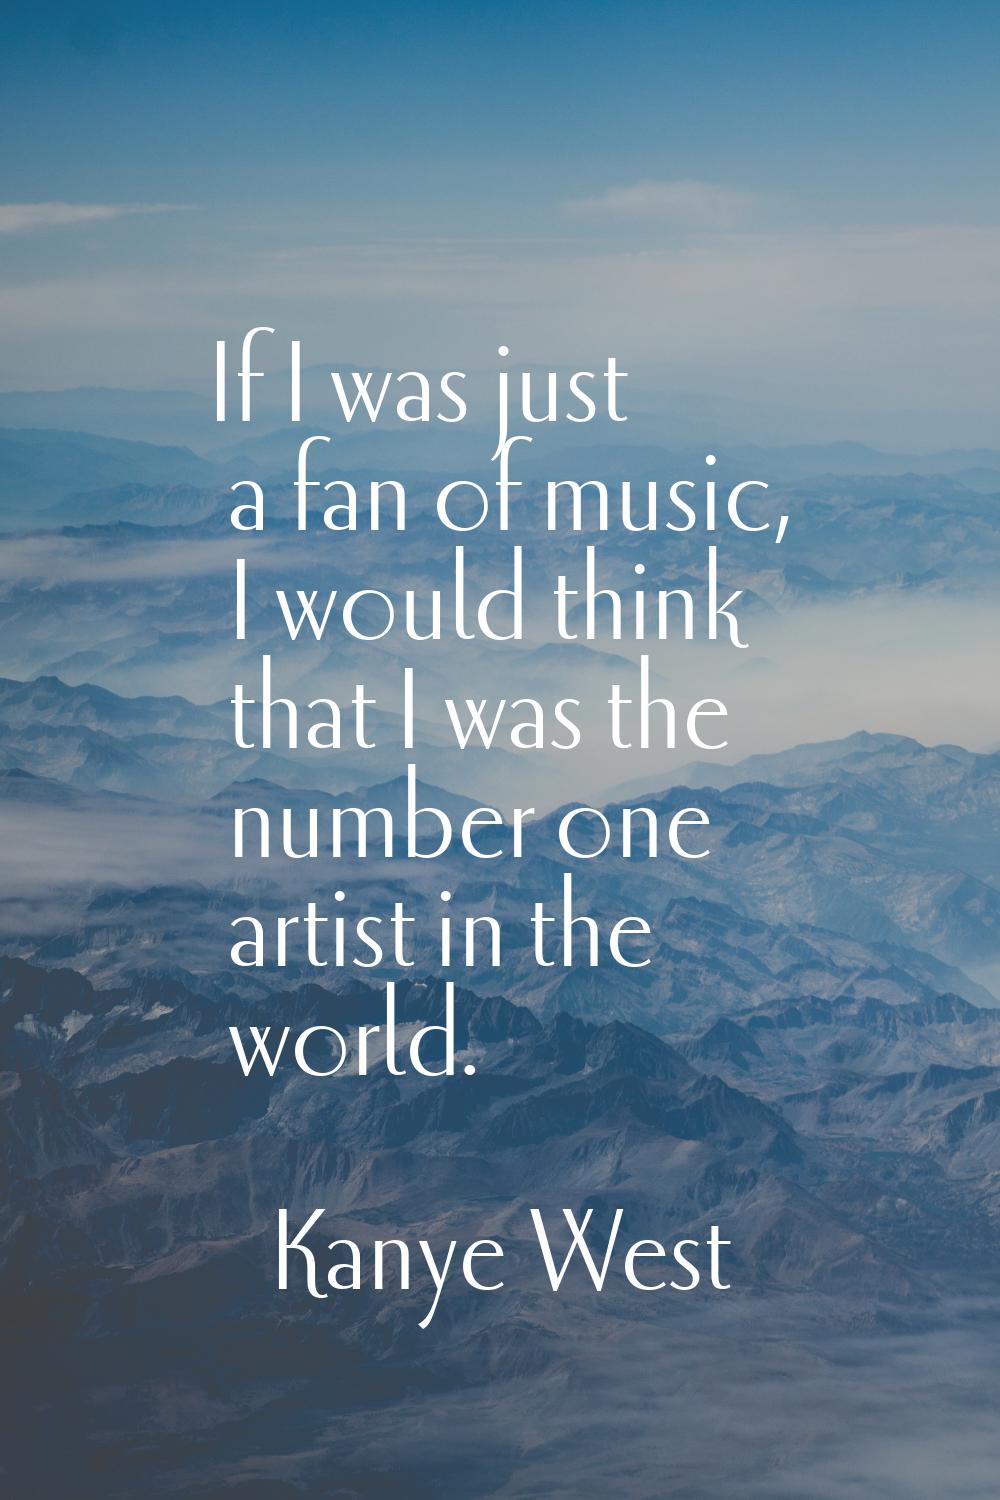 If I was just a fan of music, I would think that I was the number one artist in the world.